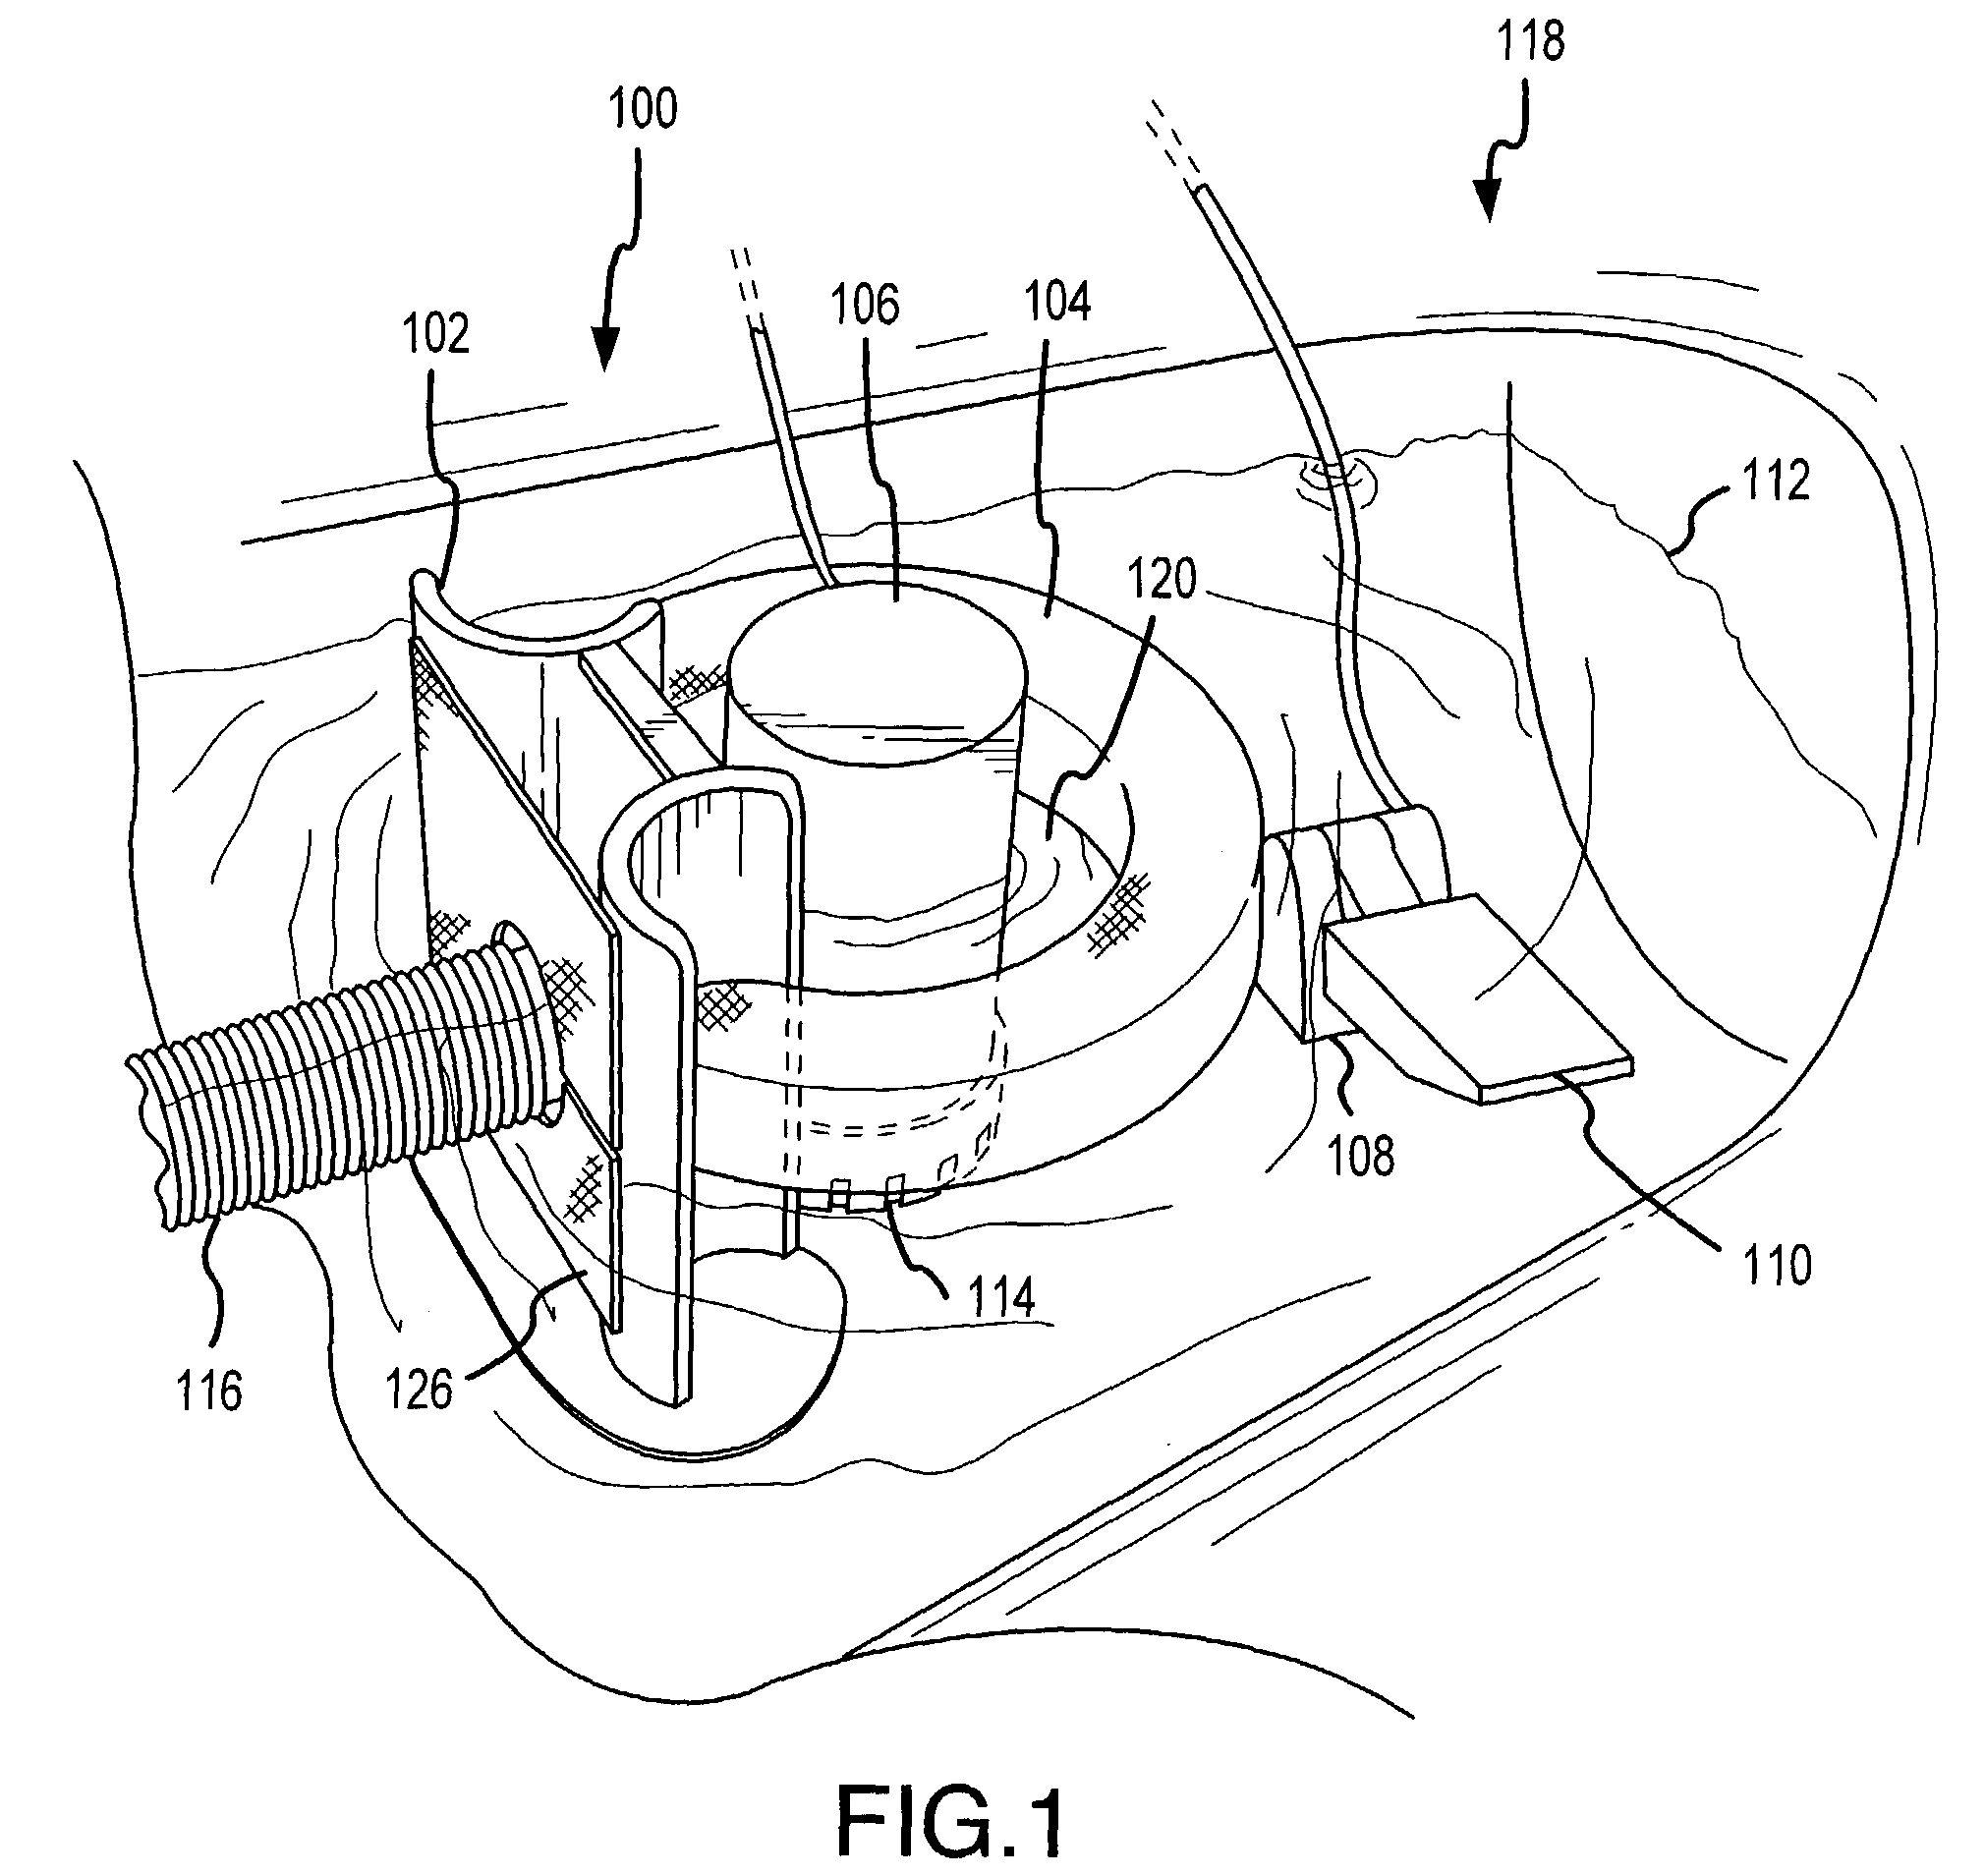 Water pollution prevention and remediation apparatus